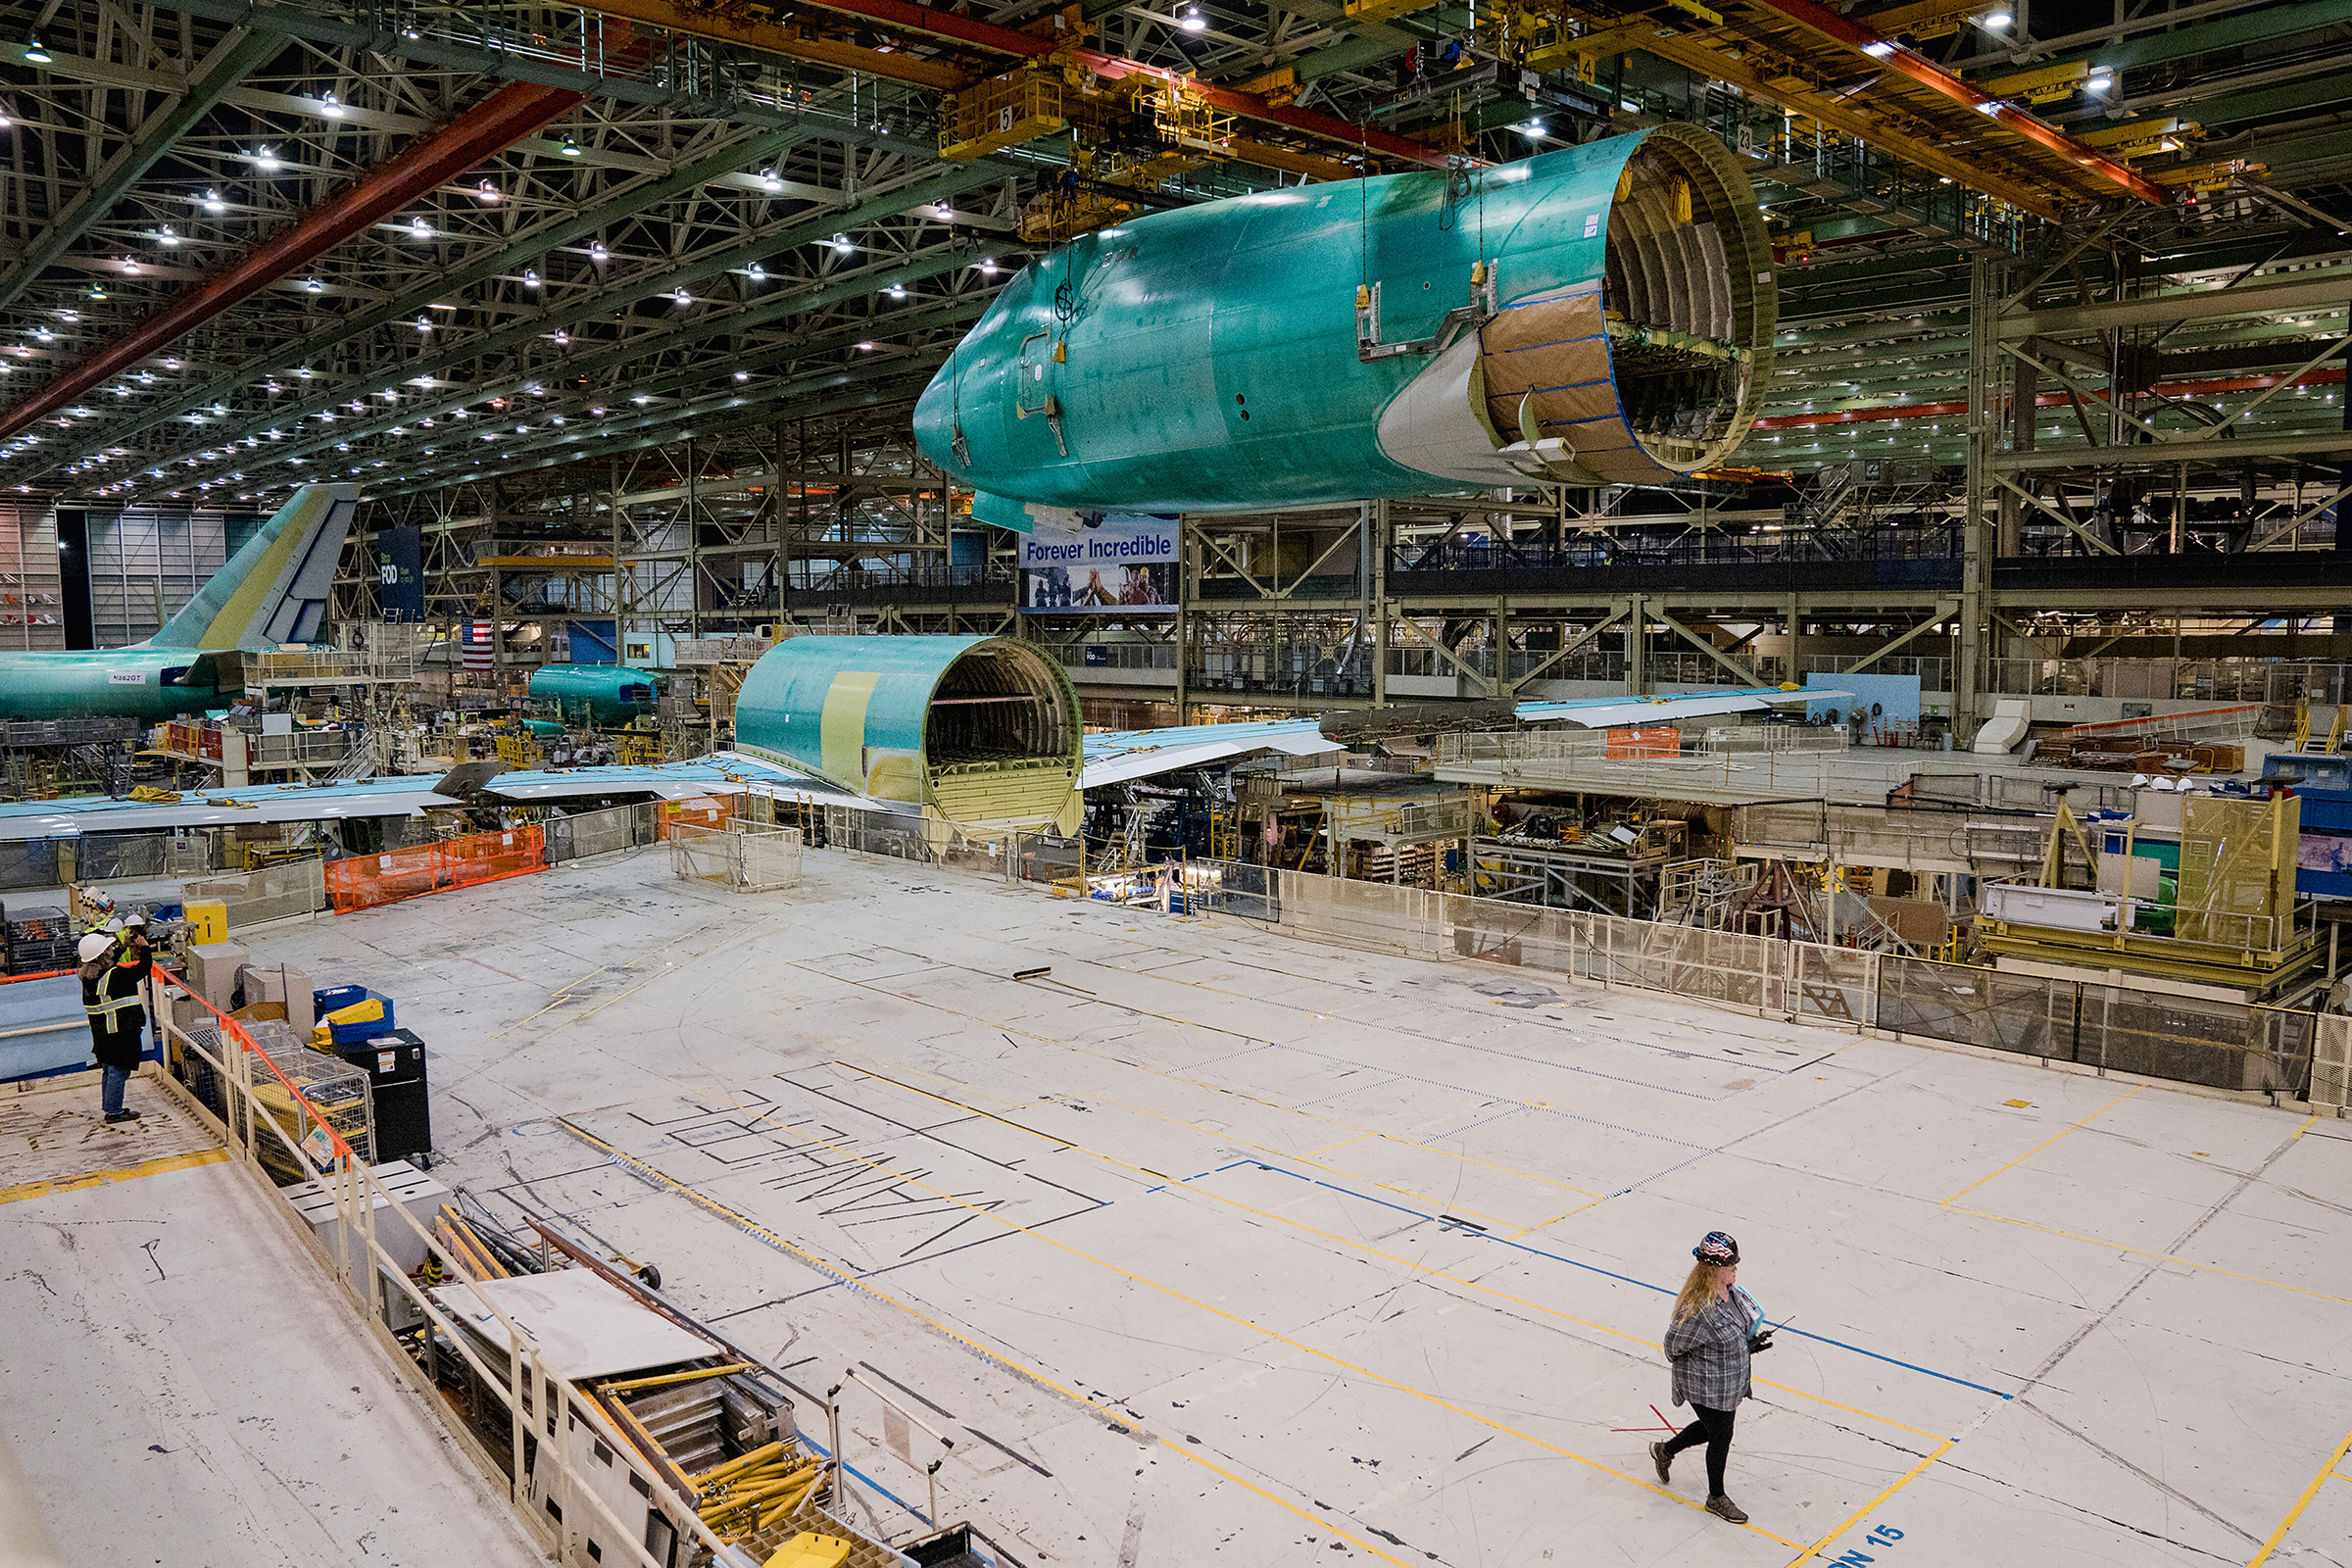 The Boeing factory, where the last 747 jumbo jet was built, in Everett, Wash., Sept. 28, 2022. The "Queen of the Skies" brought air travel to the masses, but its half-century run is coming to an end. (Jovelle Tamayo—The New York Times/Redux)